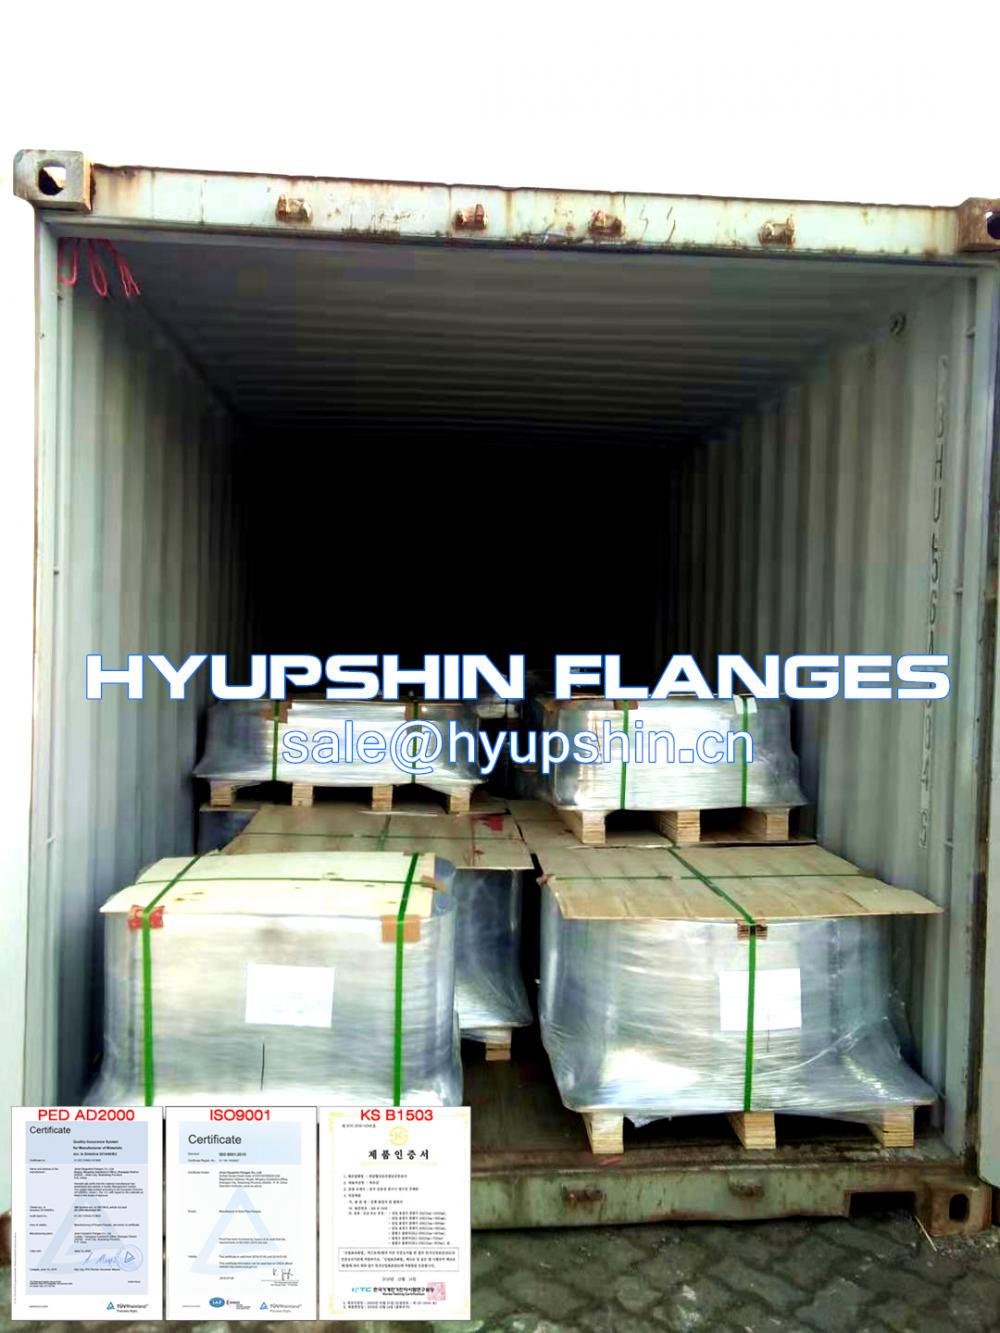 Hyupshin Flanges Export From Qingdao Port